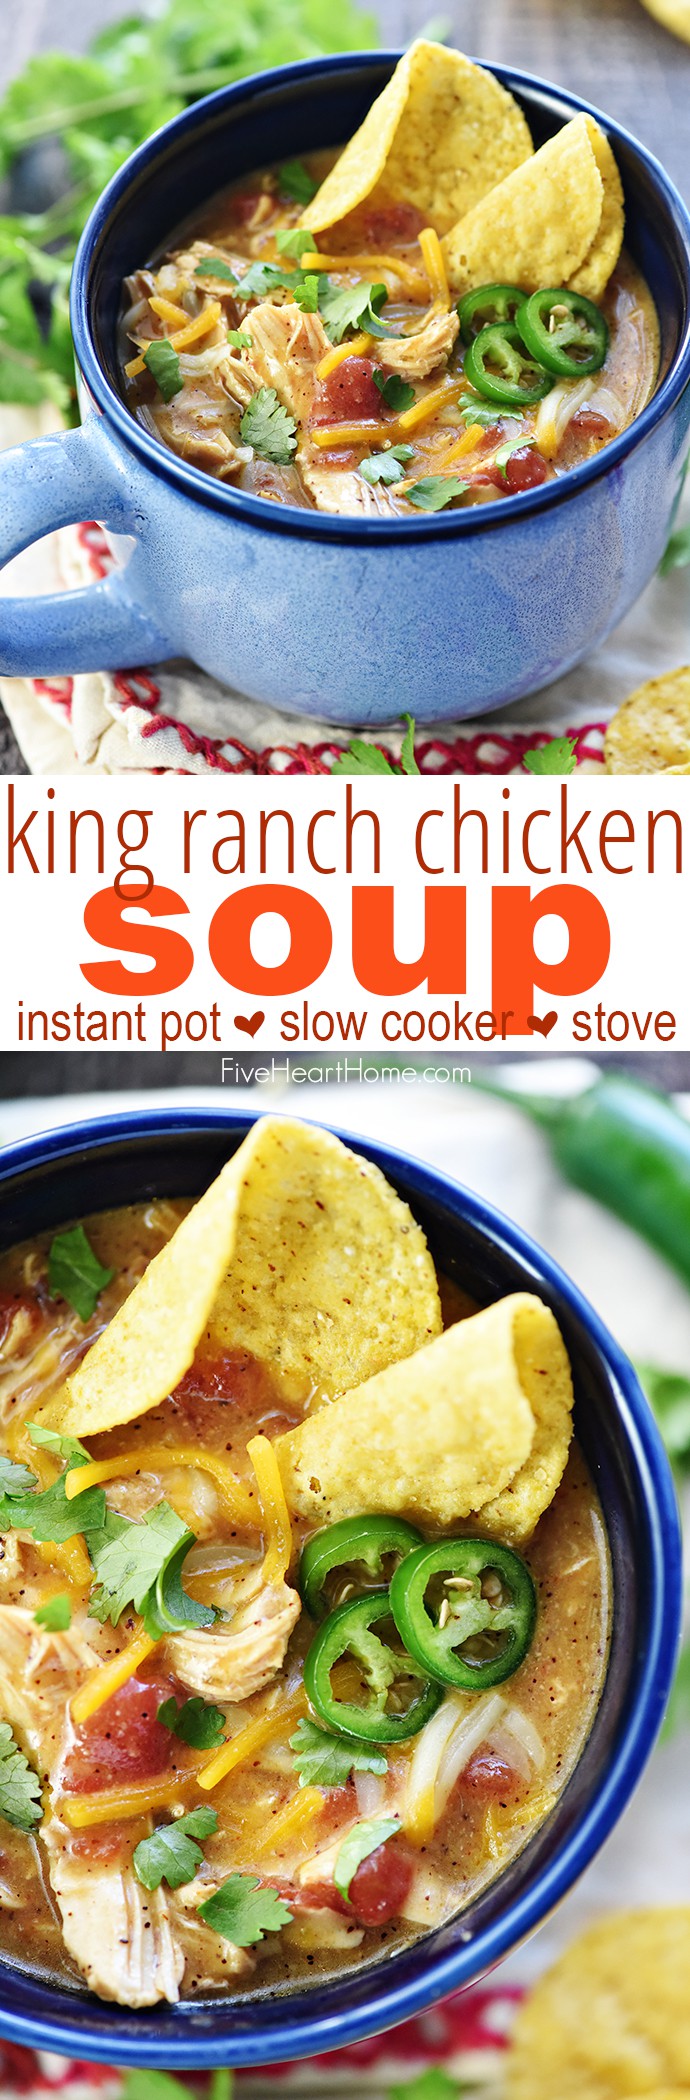 King Ranch Chicken Soup ~ a creamy and comforting soup recipe with all the zesty flavor of the classic casserole...and it's easy to make in the slow cooker, in the Instant Pot, or on the stove! | FiveHeartHome.com via @fivehearthome